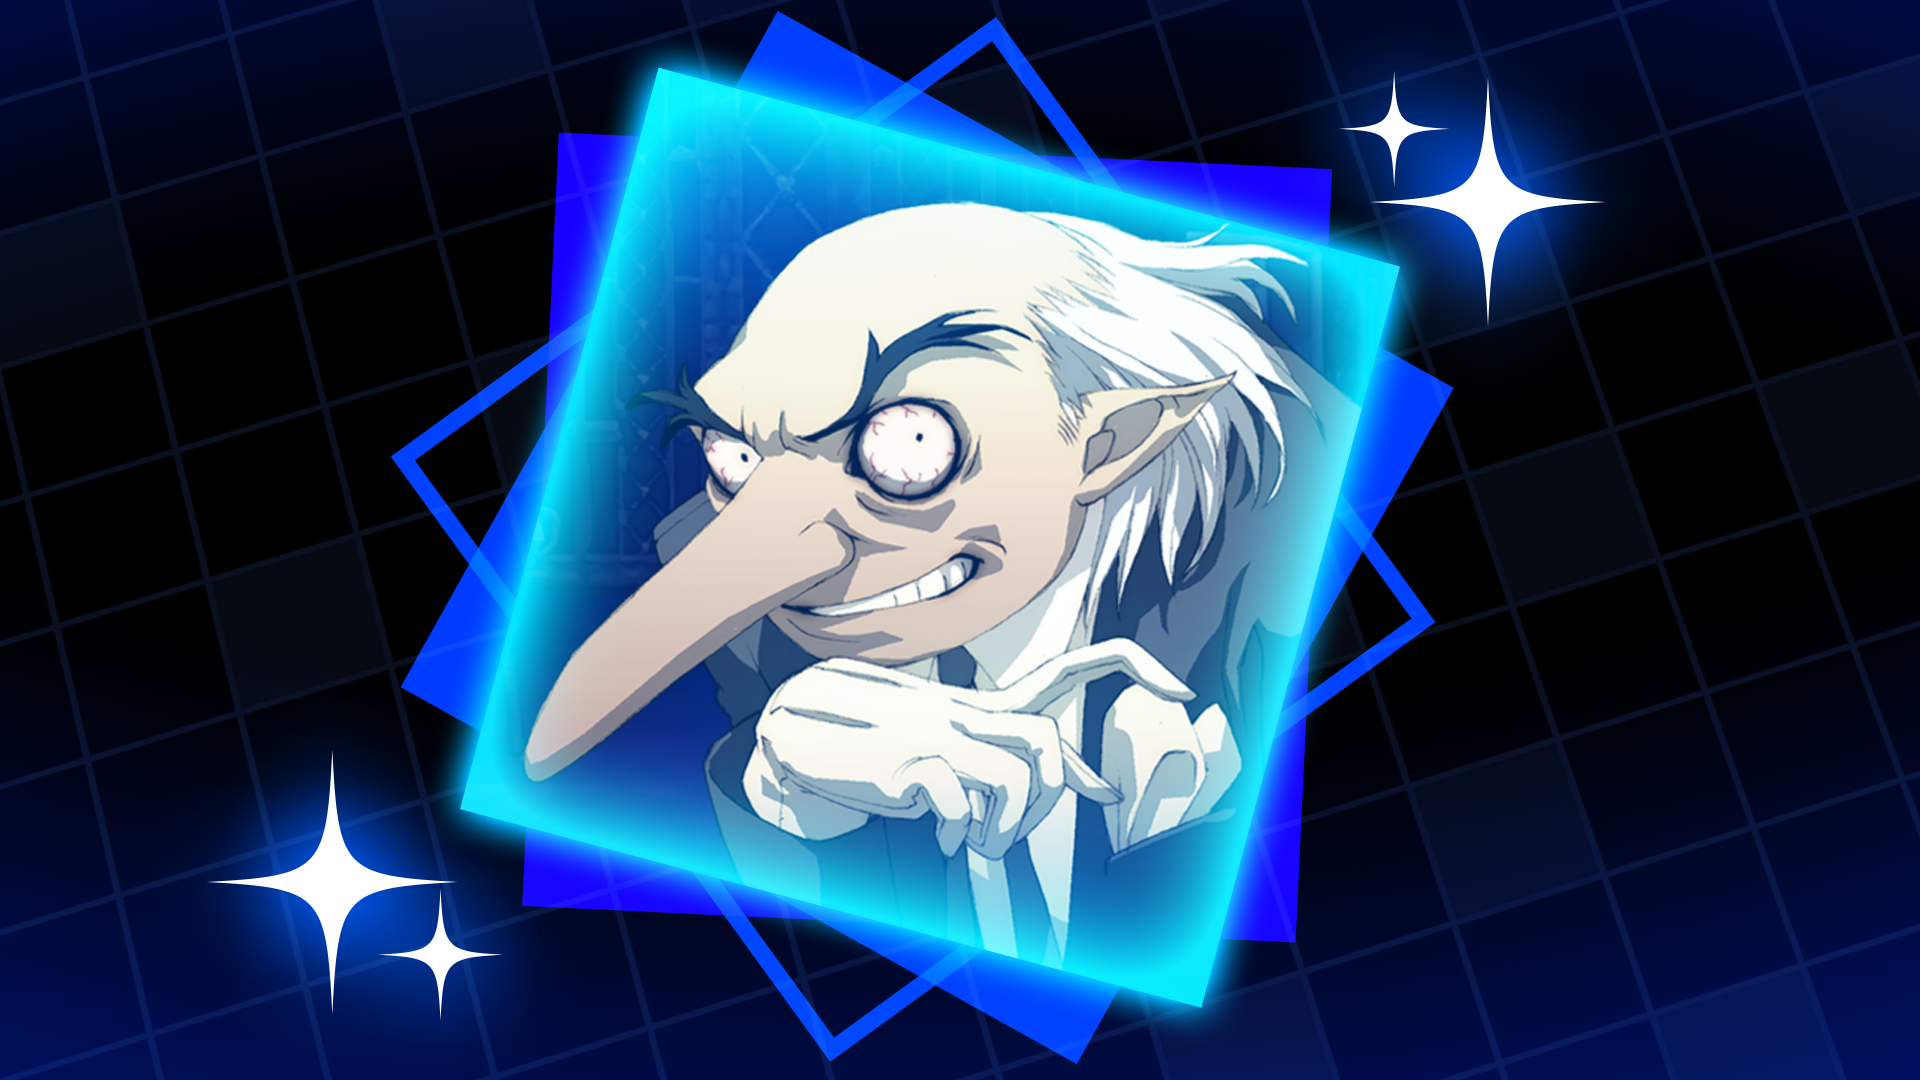 Icon for Fusion Expert